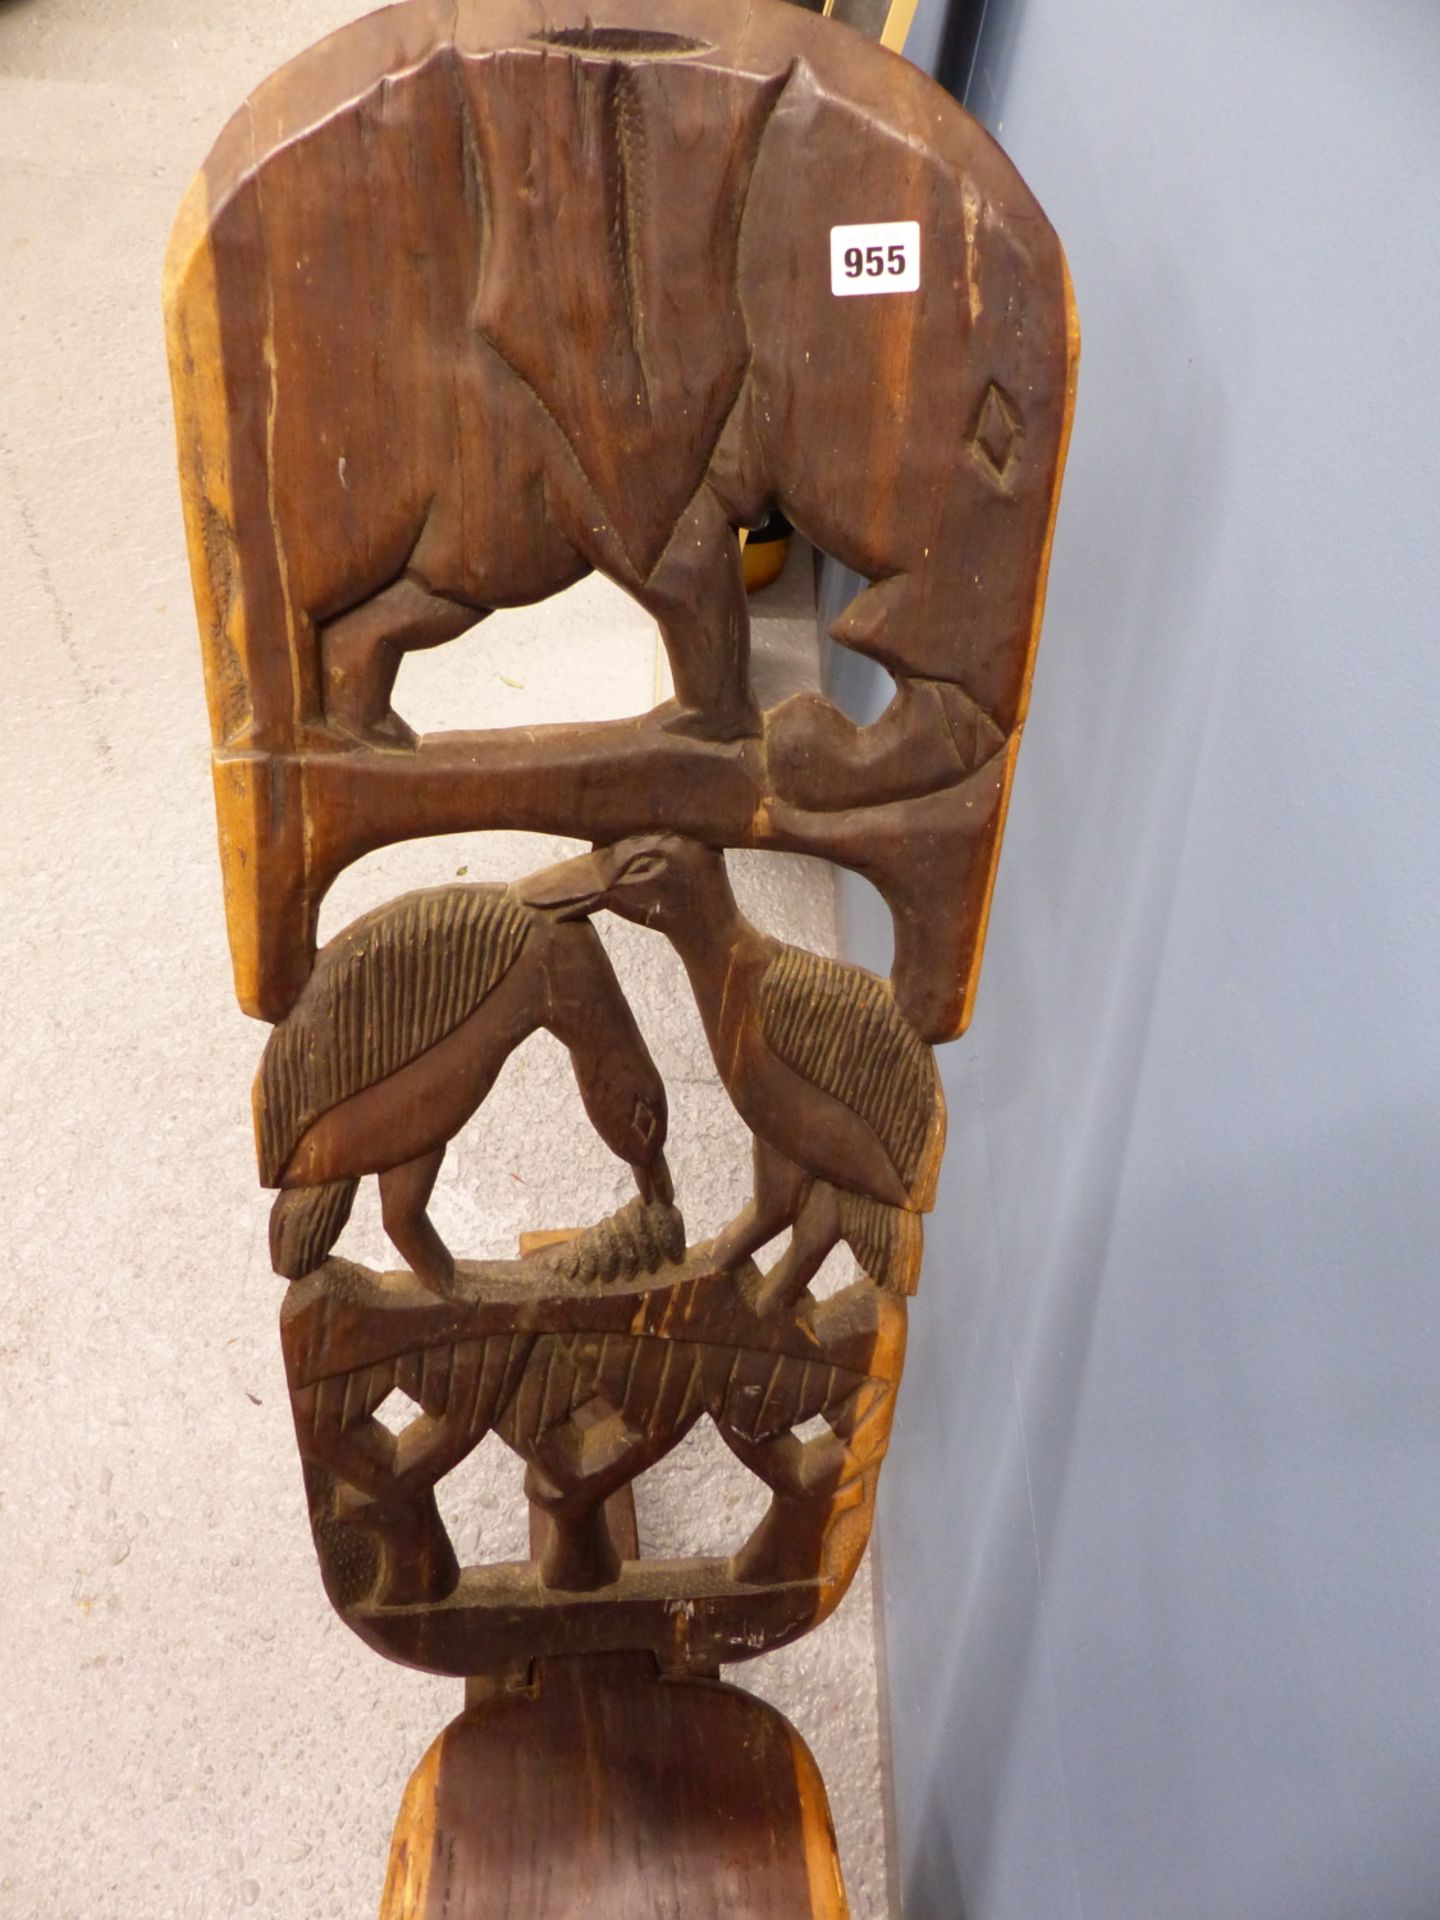 AN AFRICAN CARVED HARDWOOD "BIRTHING" CHAIR. - Image 3 of 3